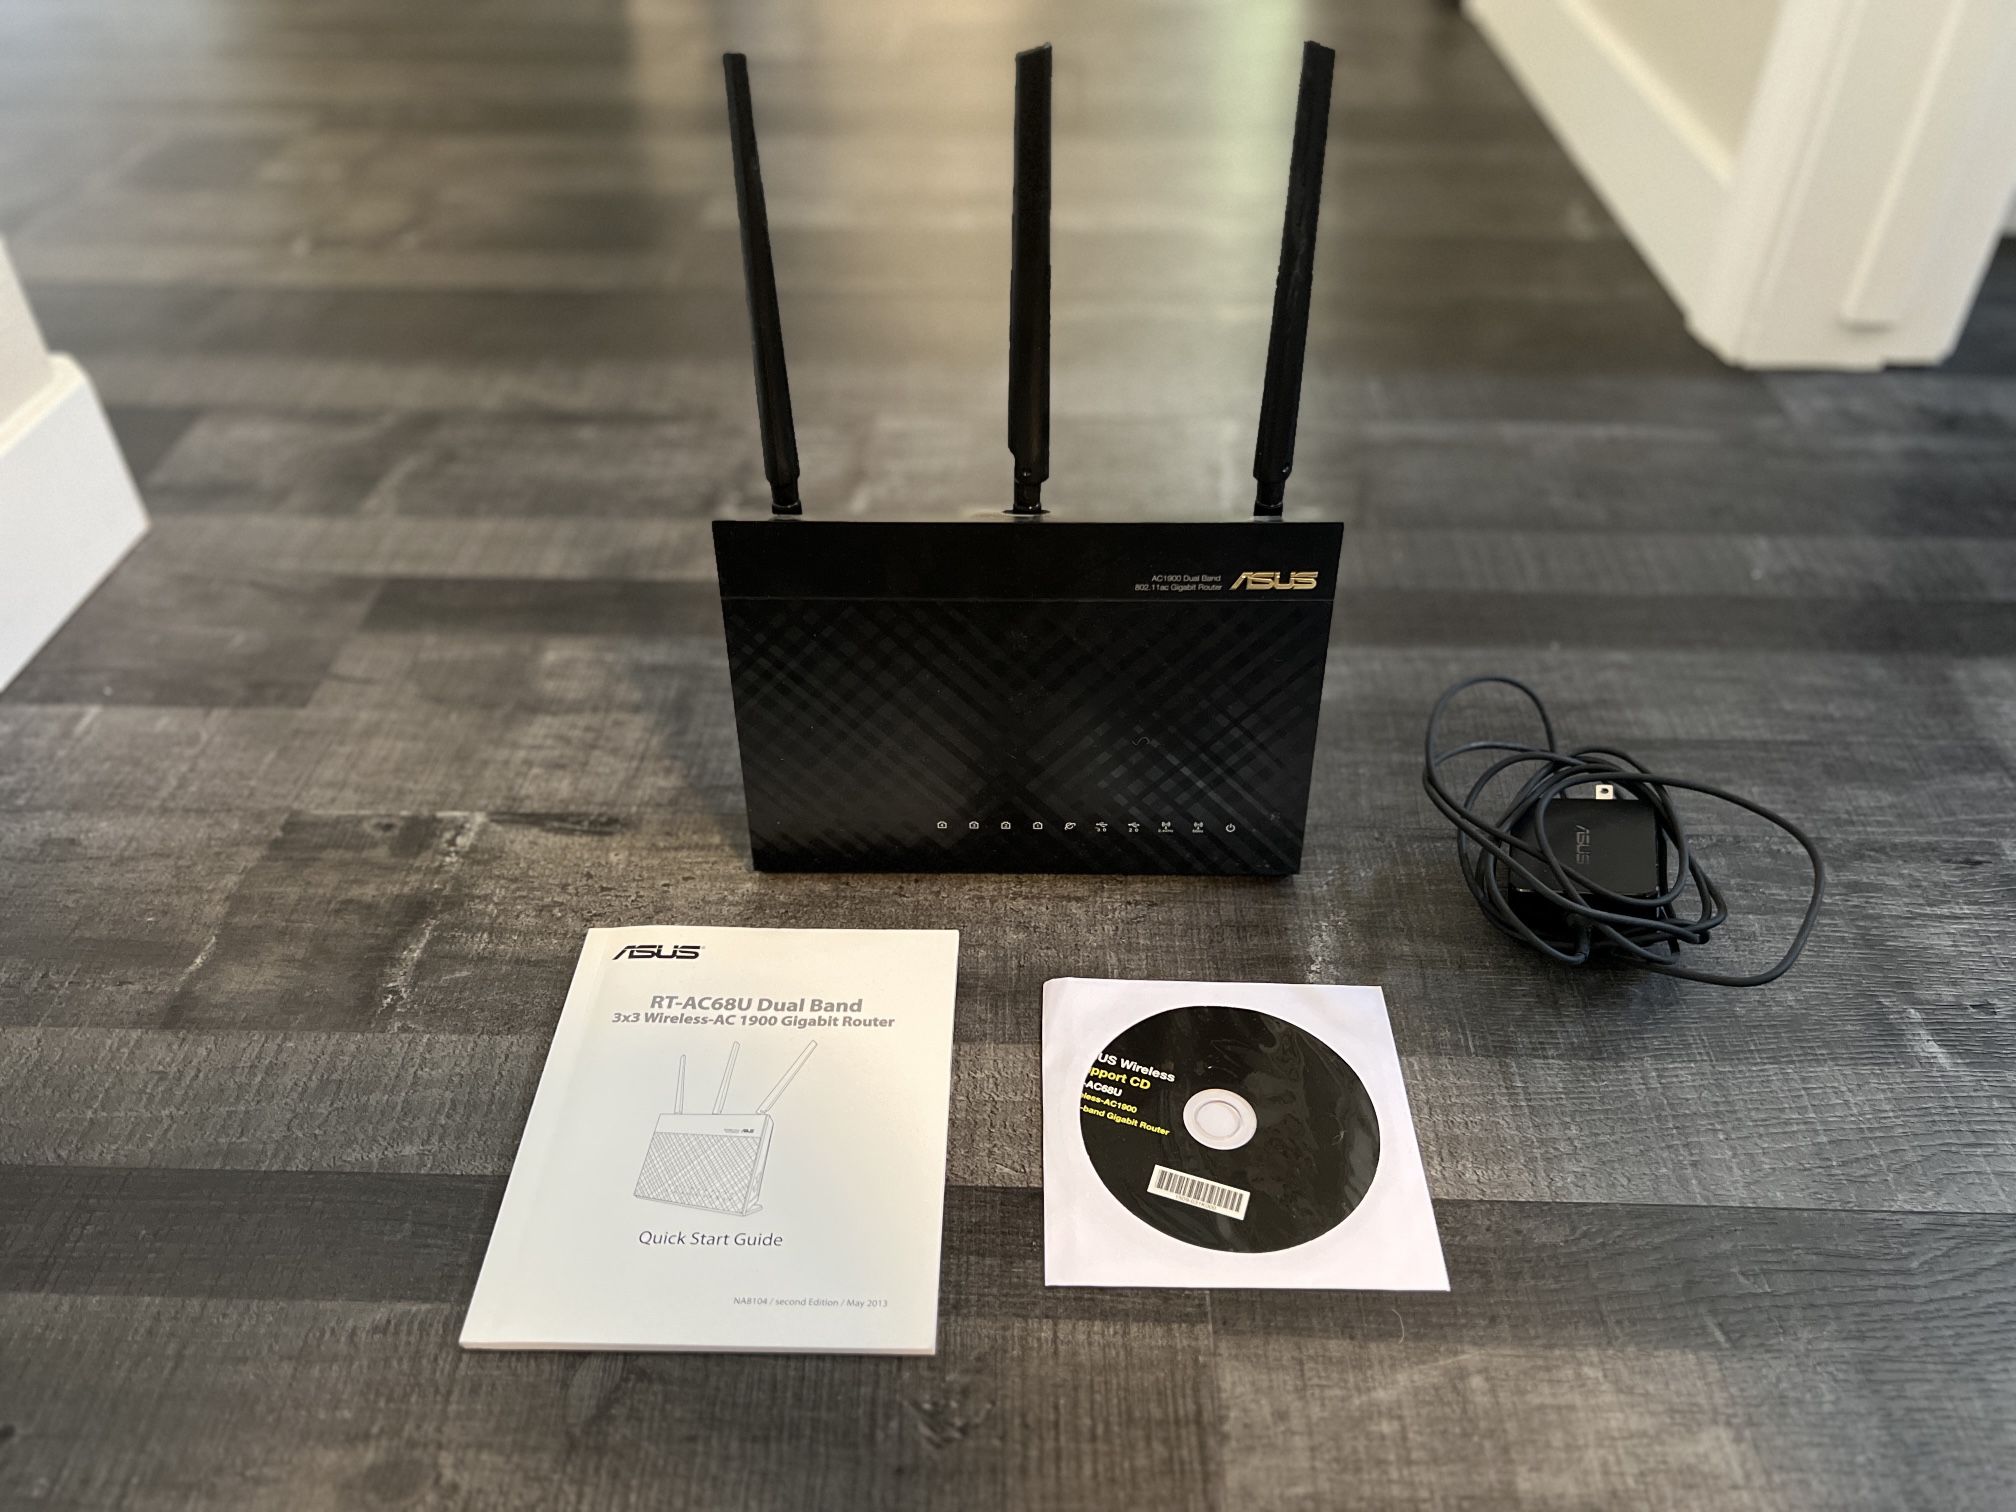 Asus Wireless Internet router Ac1900p